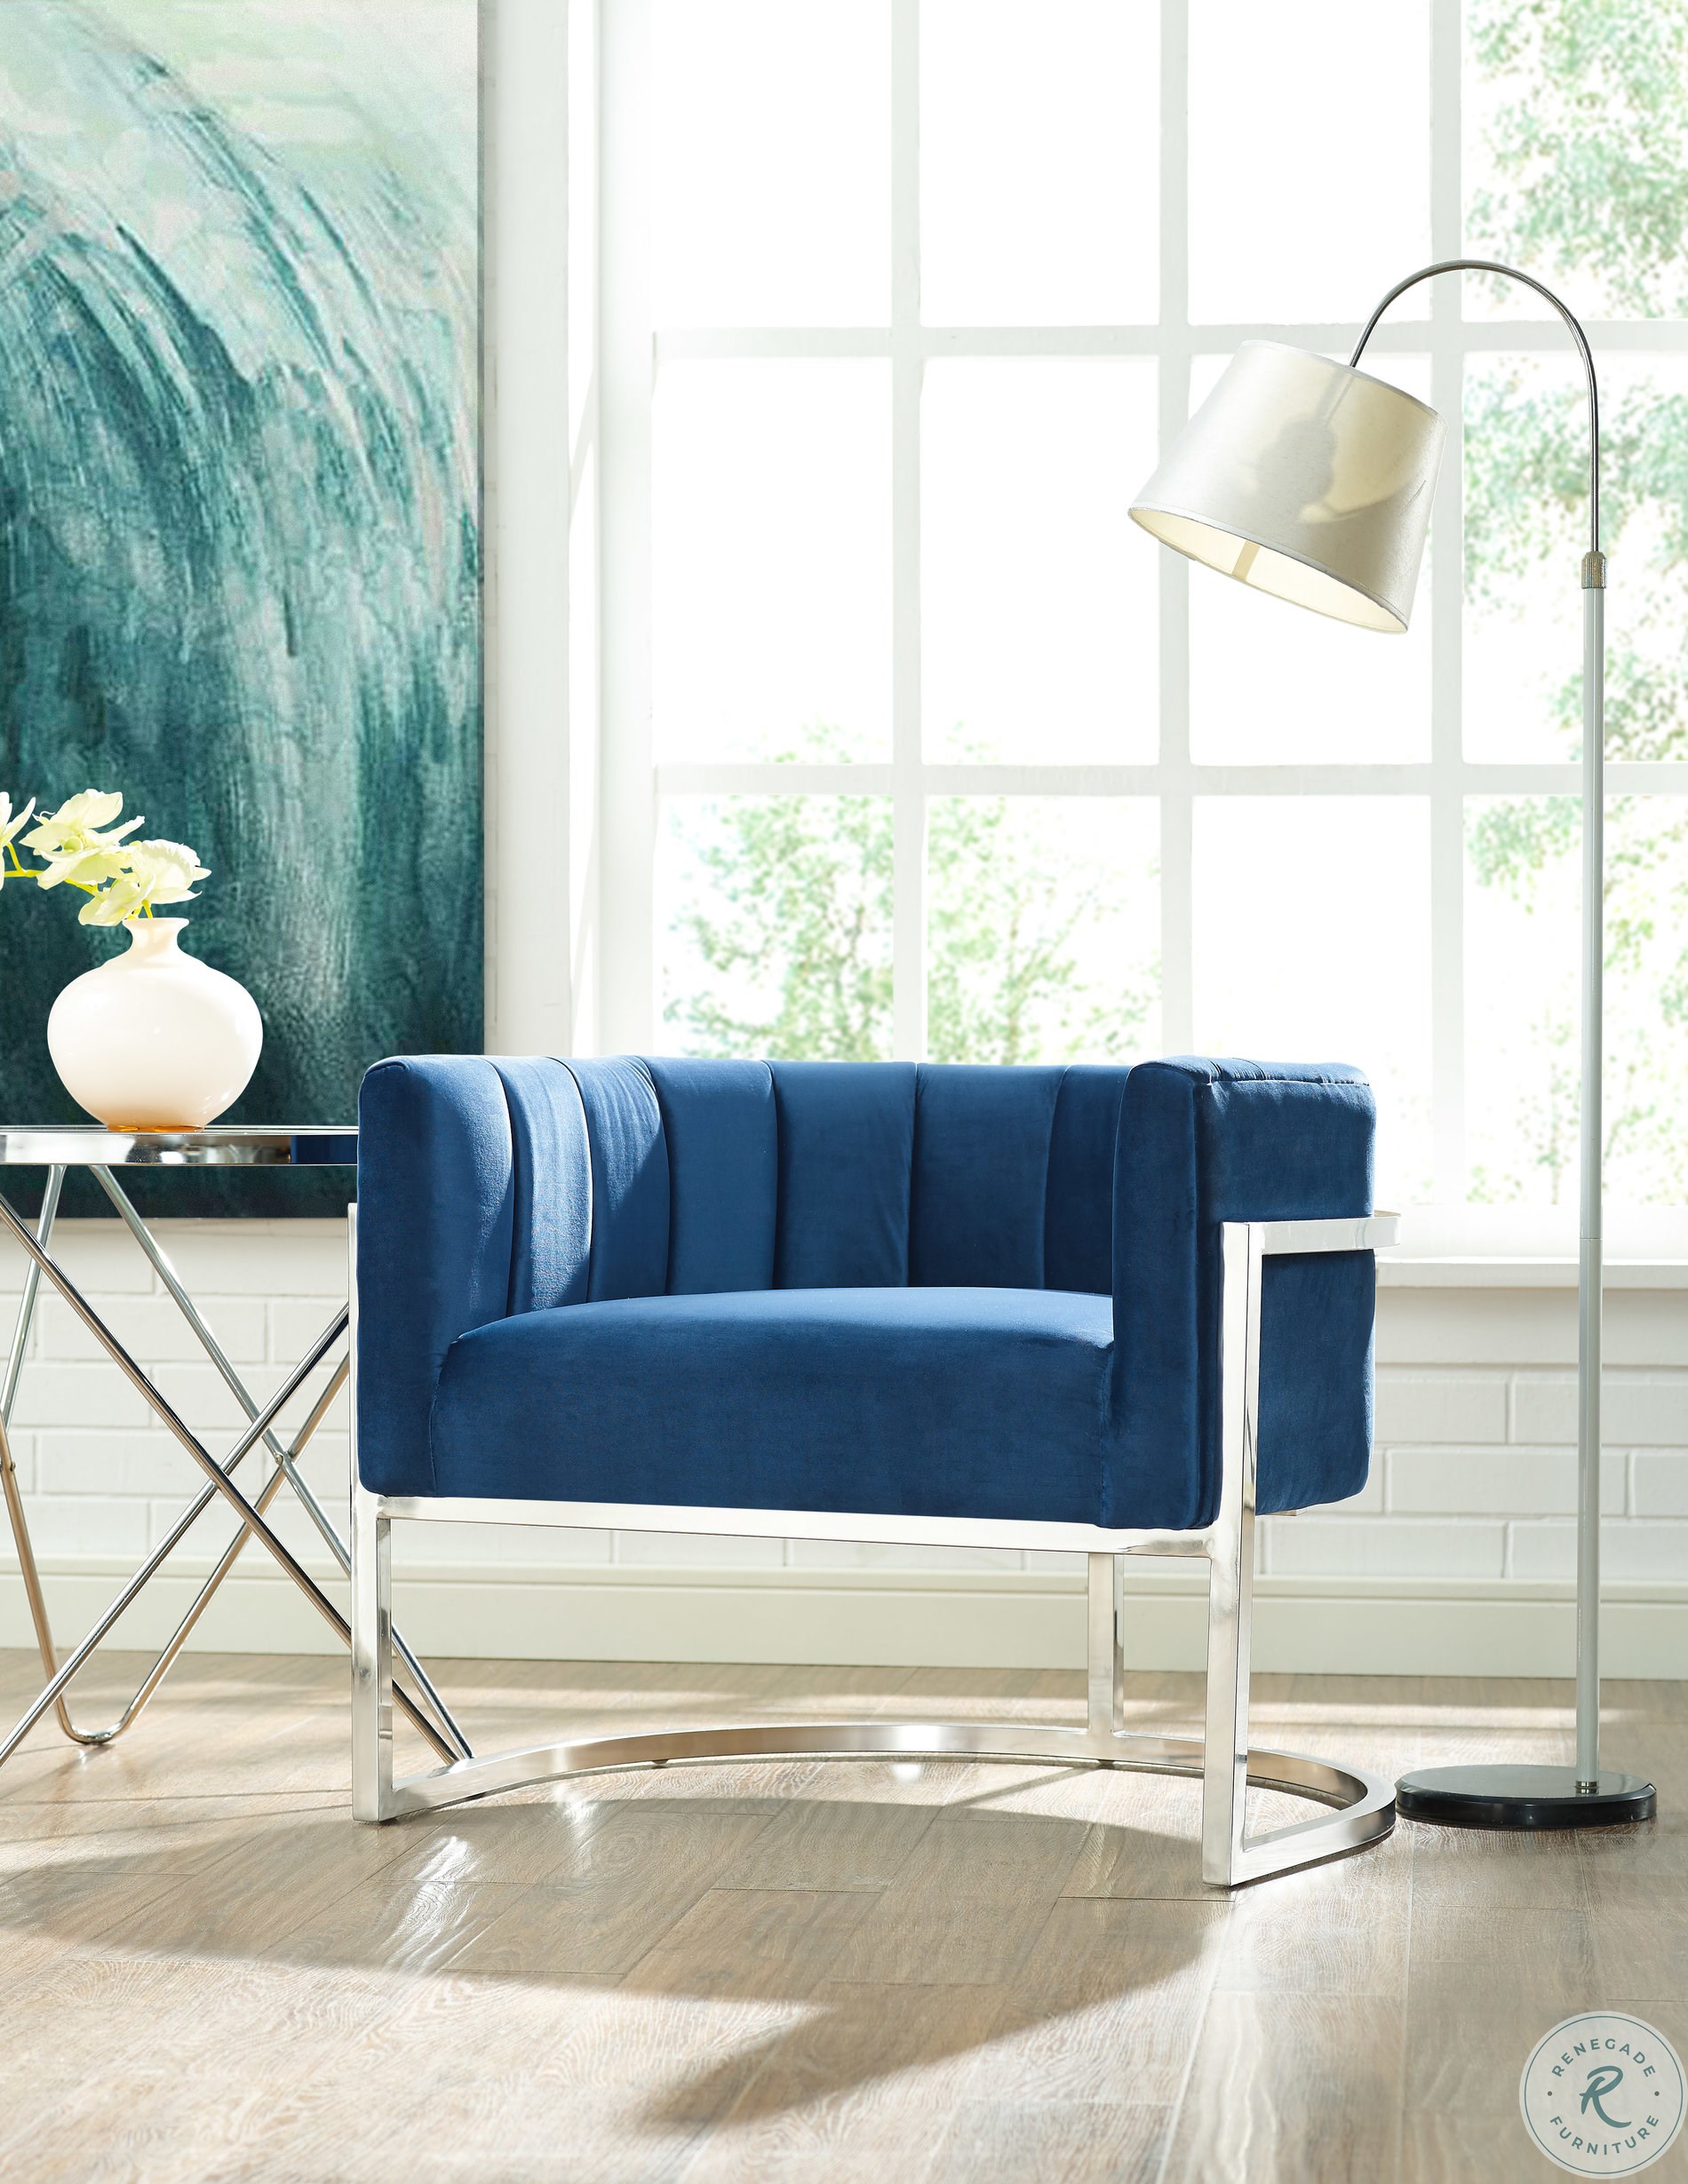 Magnolia Navy and Silver Chair